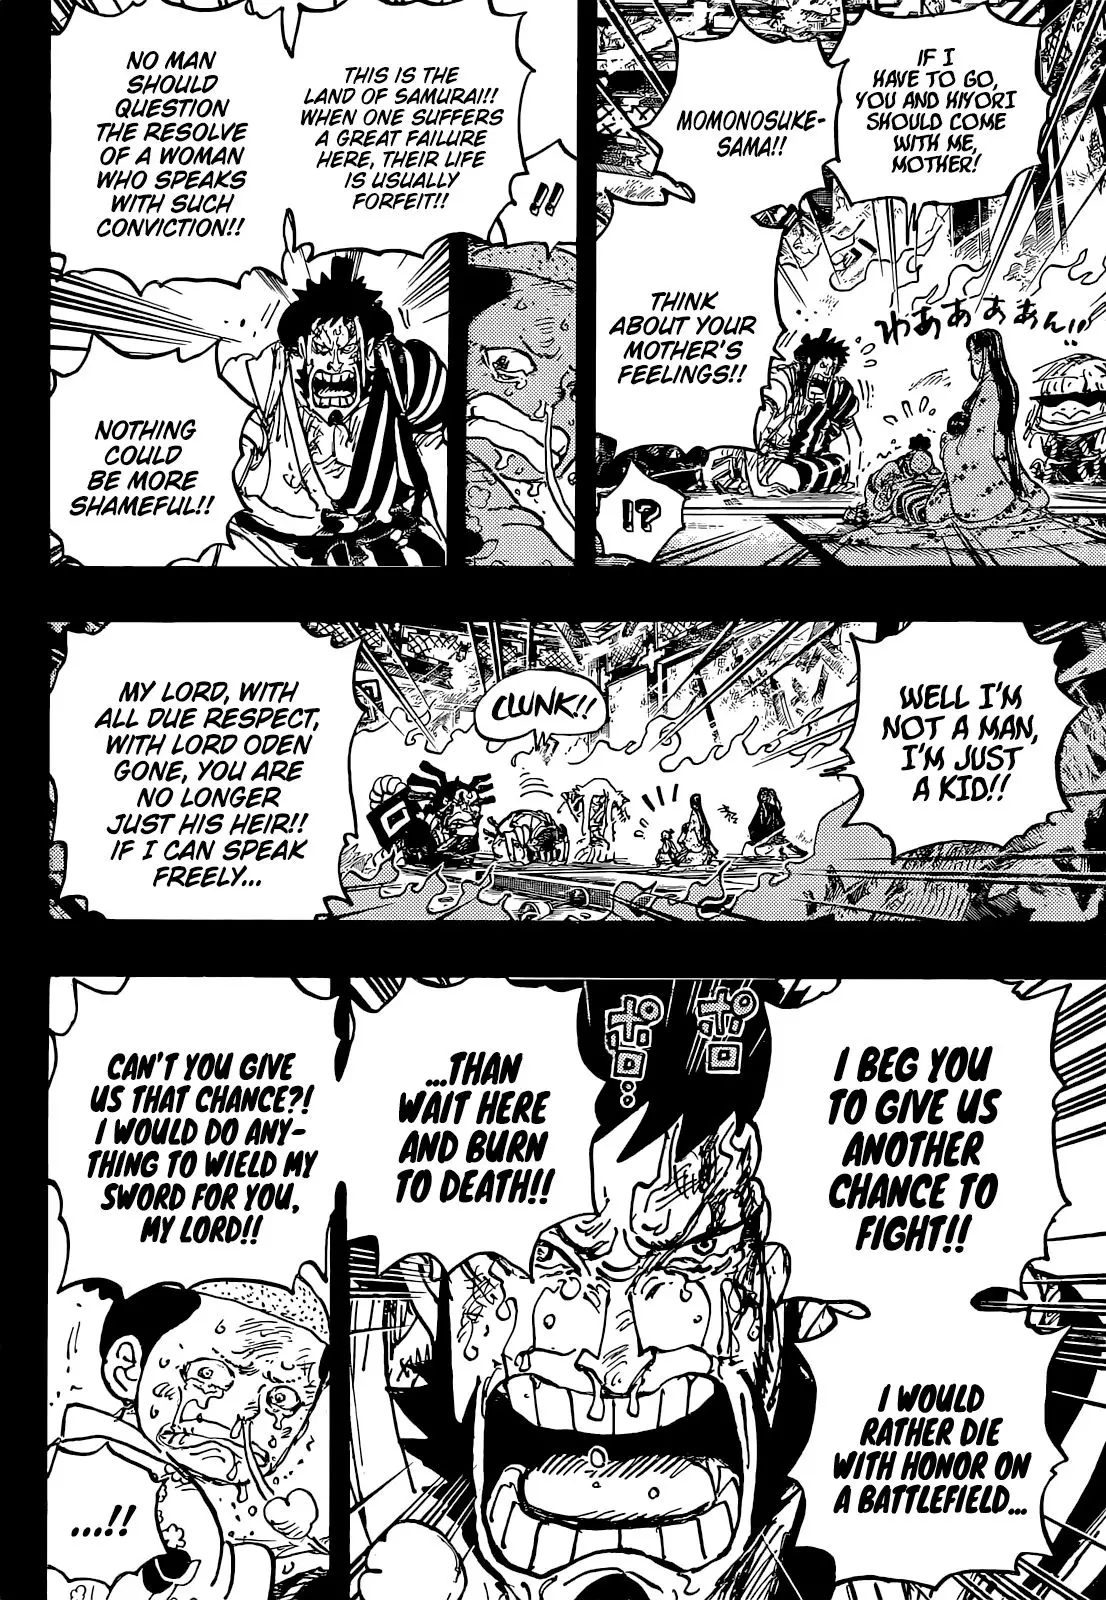 One Piece - 1047 page 5-18d64844